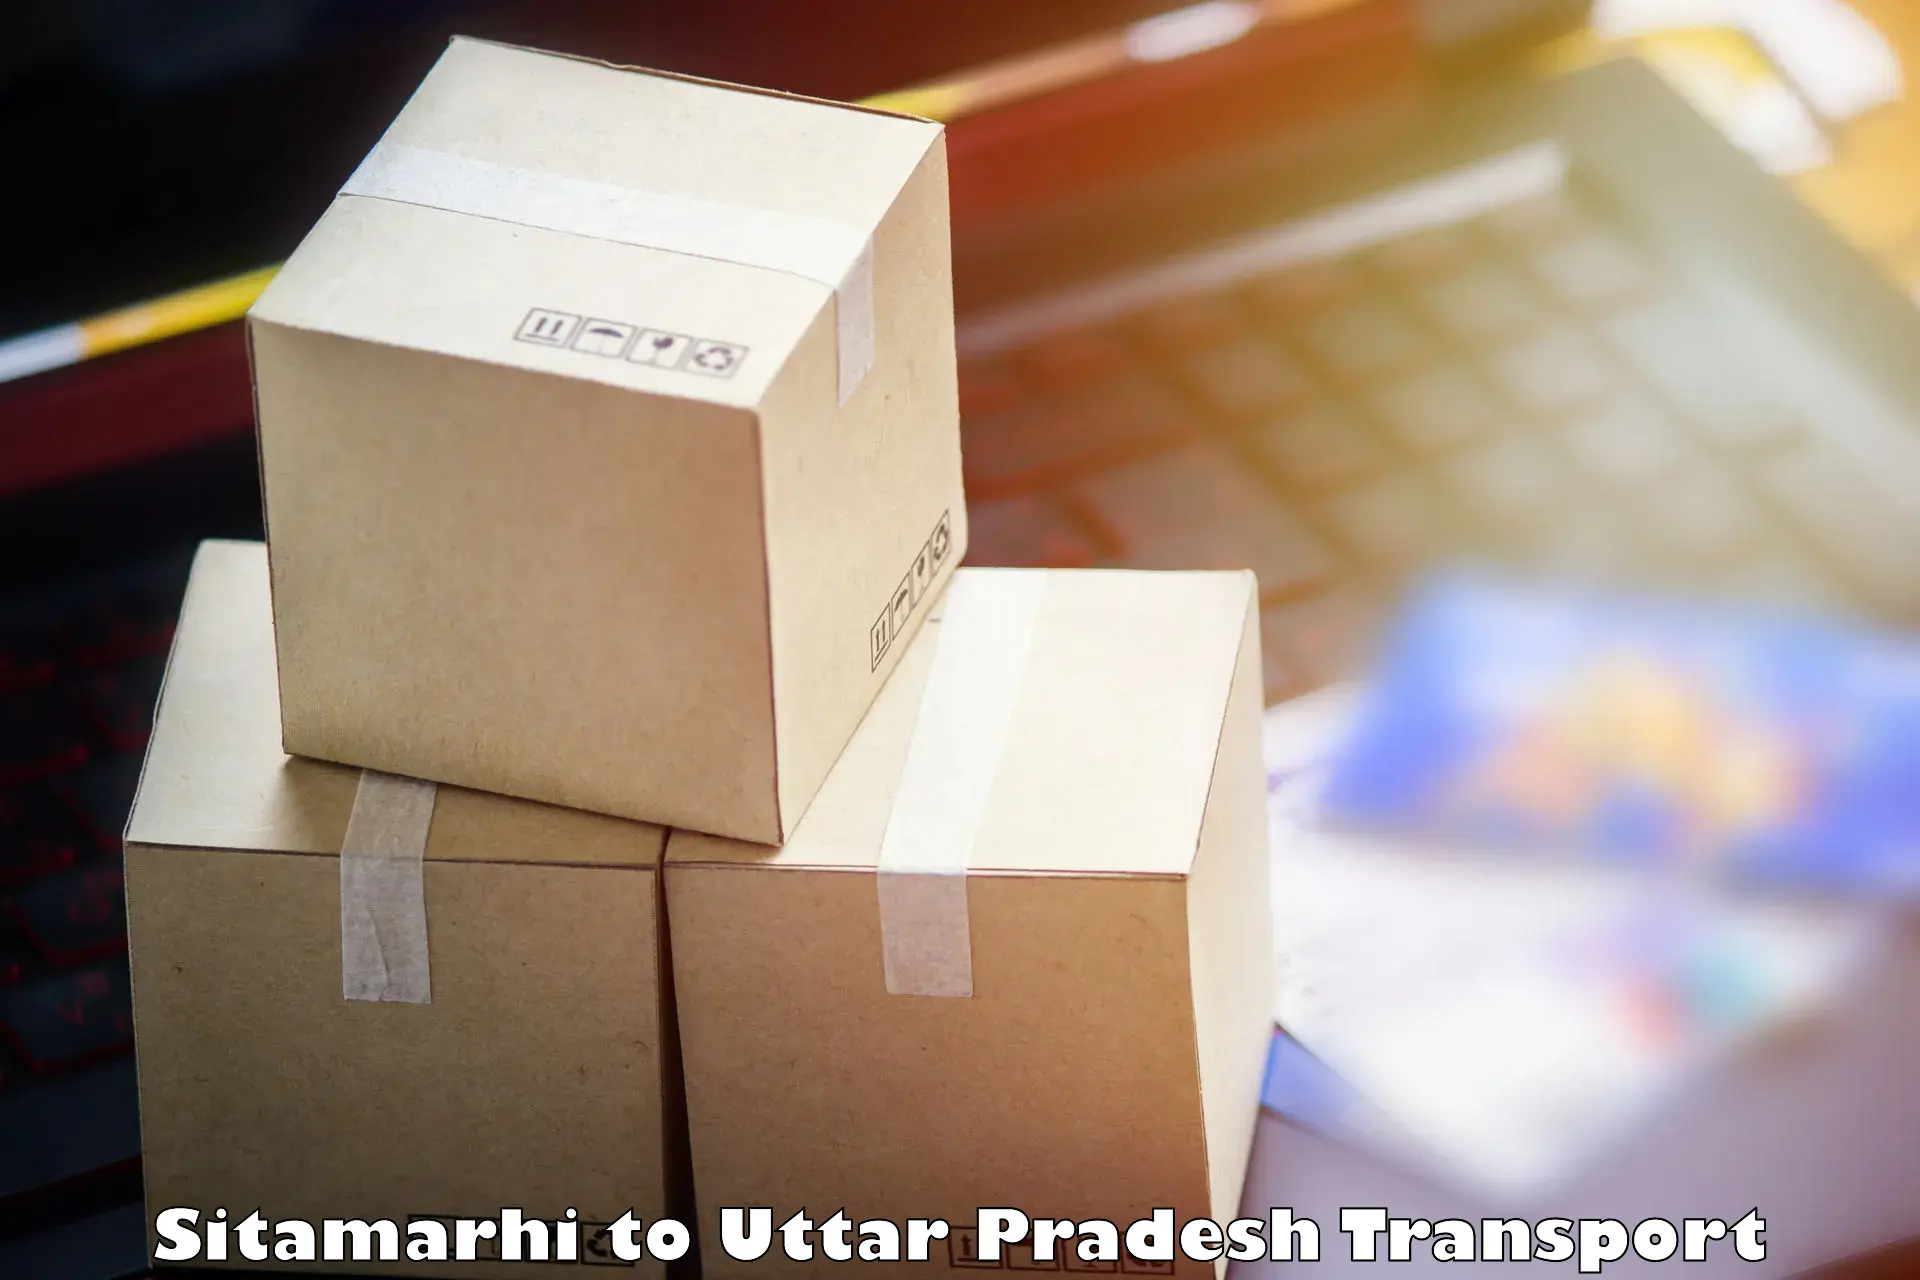 Best transport services in India Sitamarhi to Kanpur